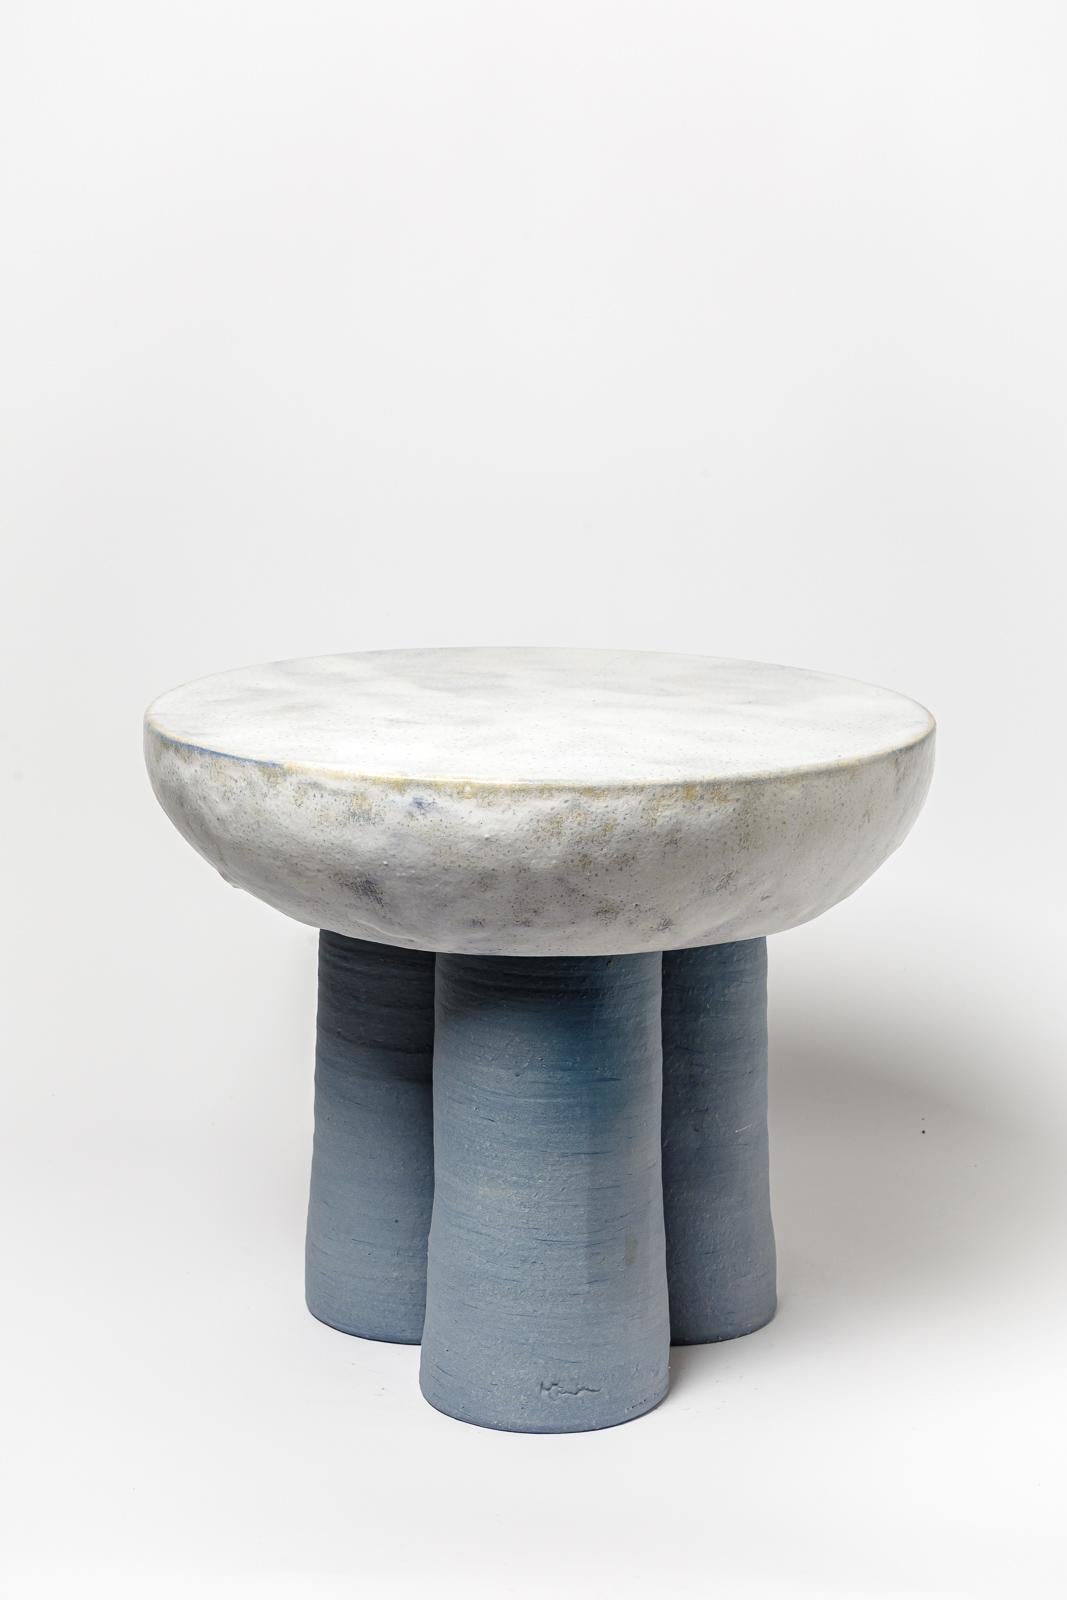 Blue and yellow glazed ceramic stool or coffee table by Mia Jensen. 
Artist signature under the base. 2023.
H : 15.7’ x 18.9’ inches.